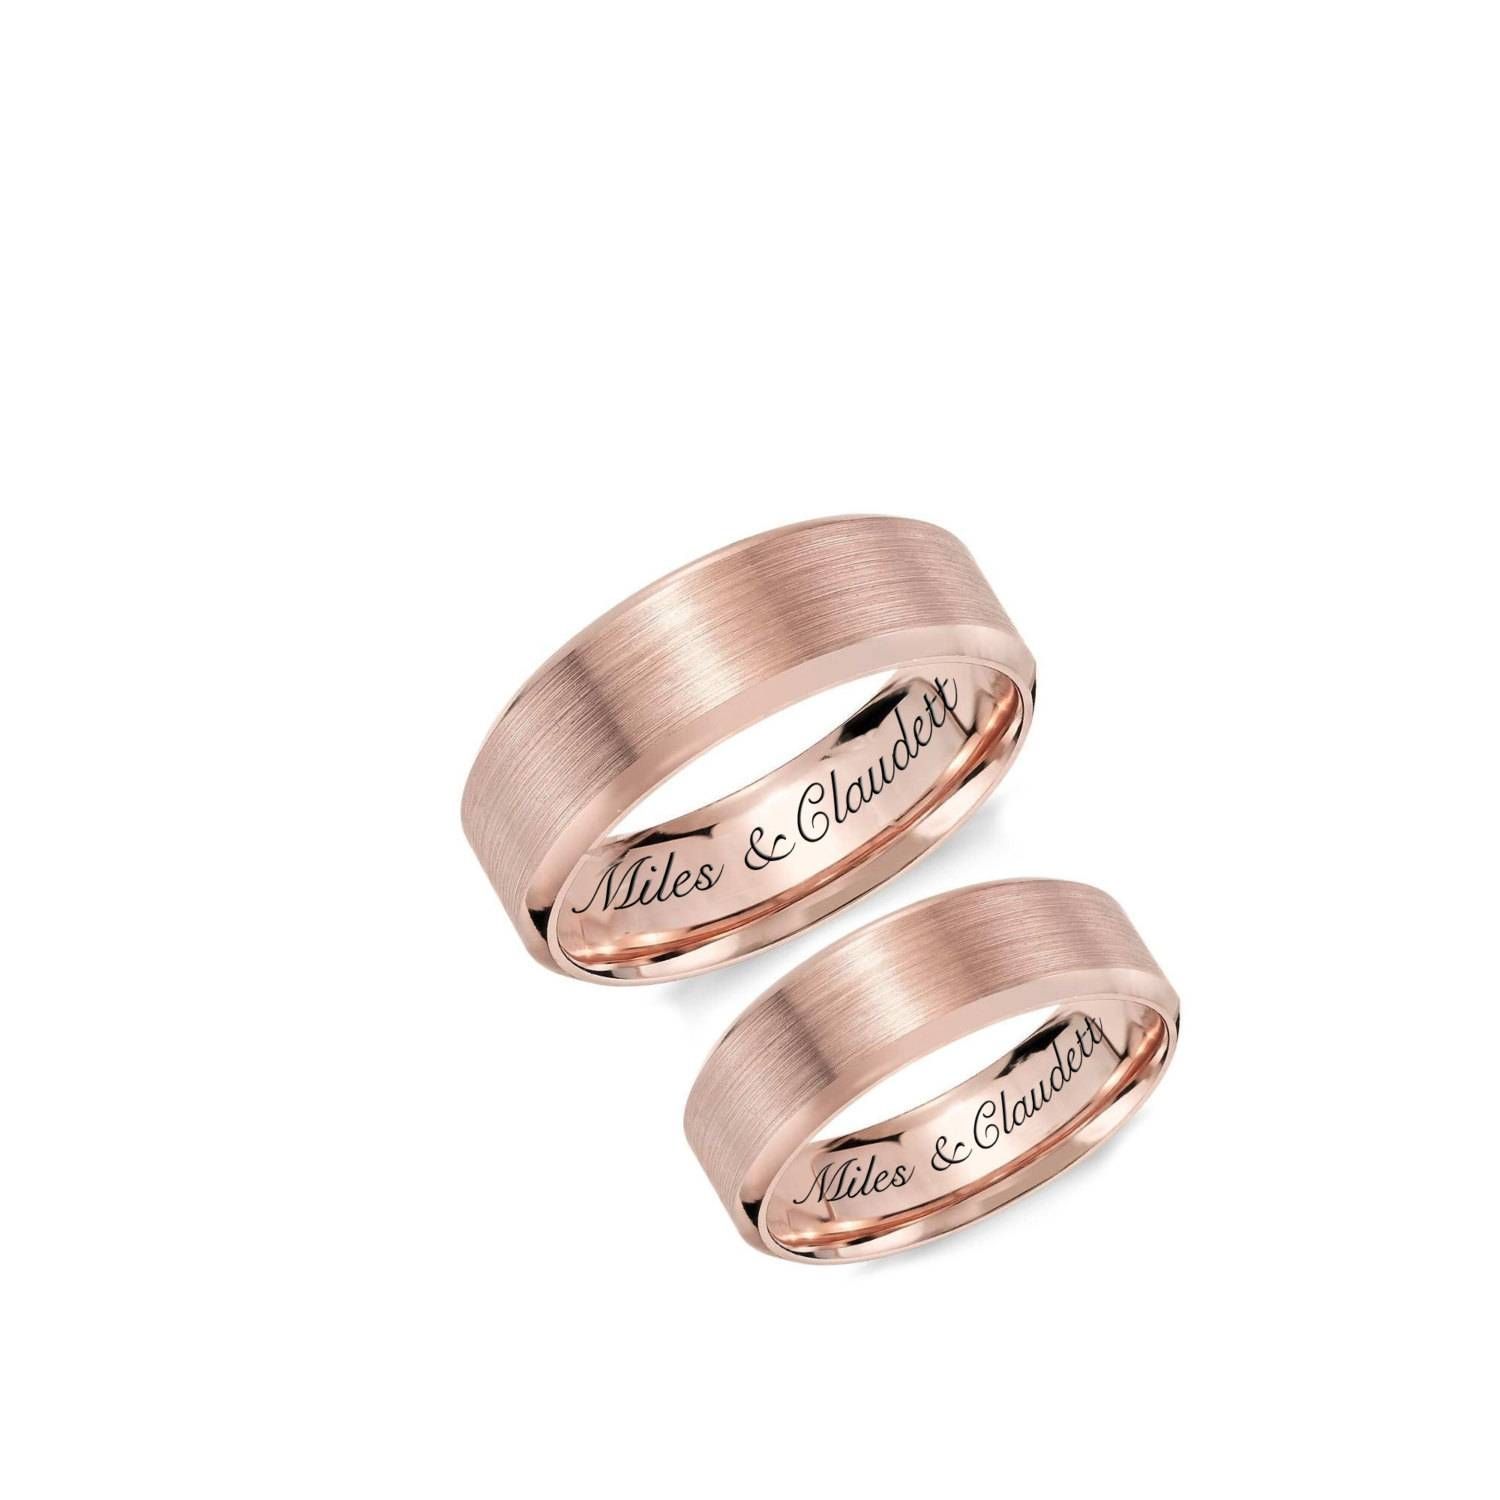 Personalized Rings Engraved Rings Rose Gold Ring Set In Most Recent Couples Anniversary Rings (View 8 of 25)